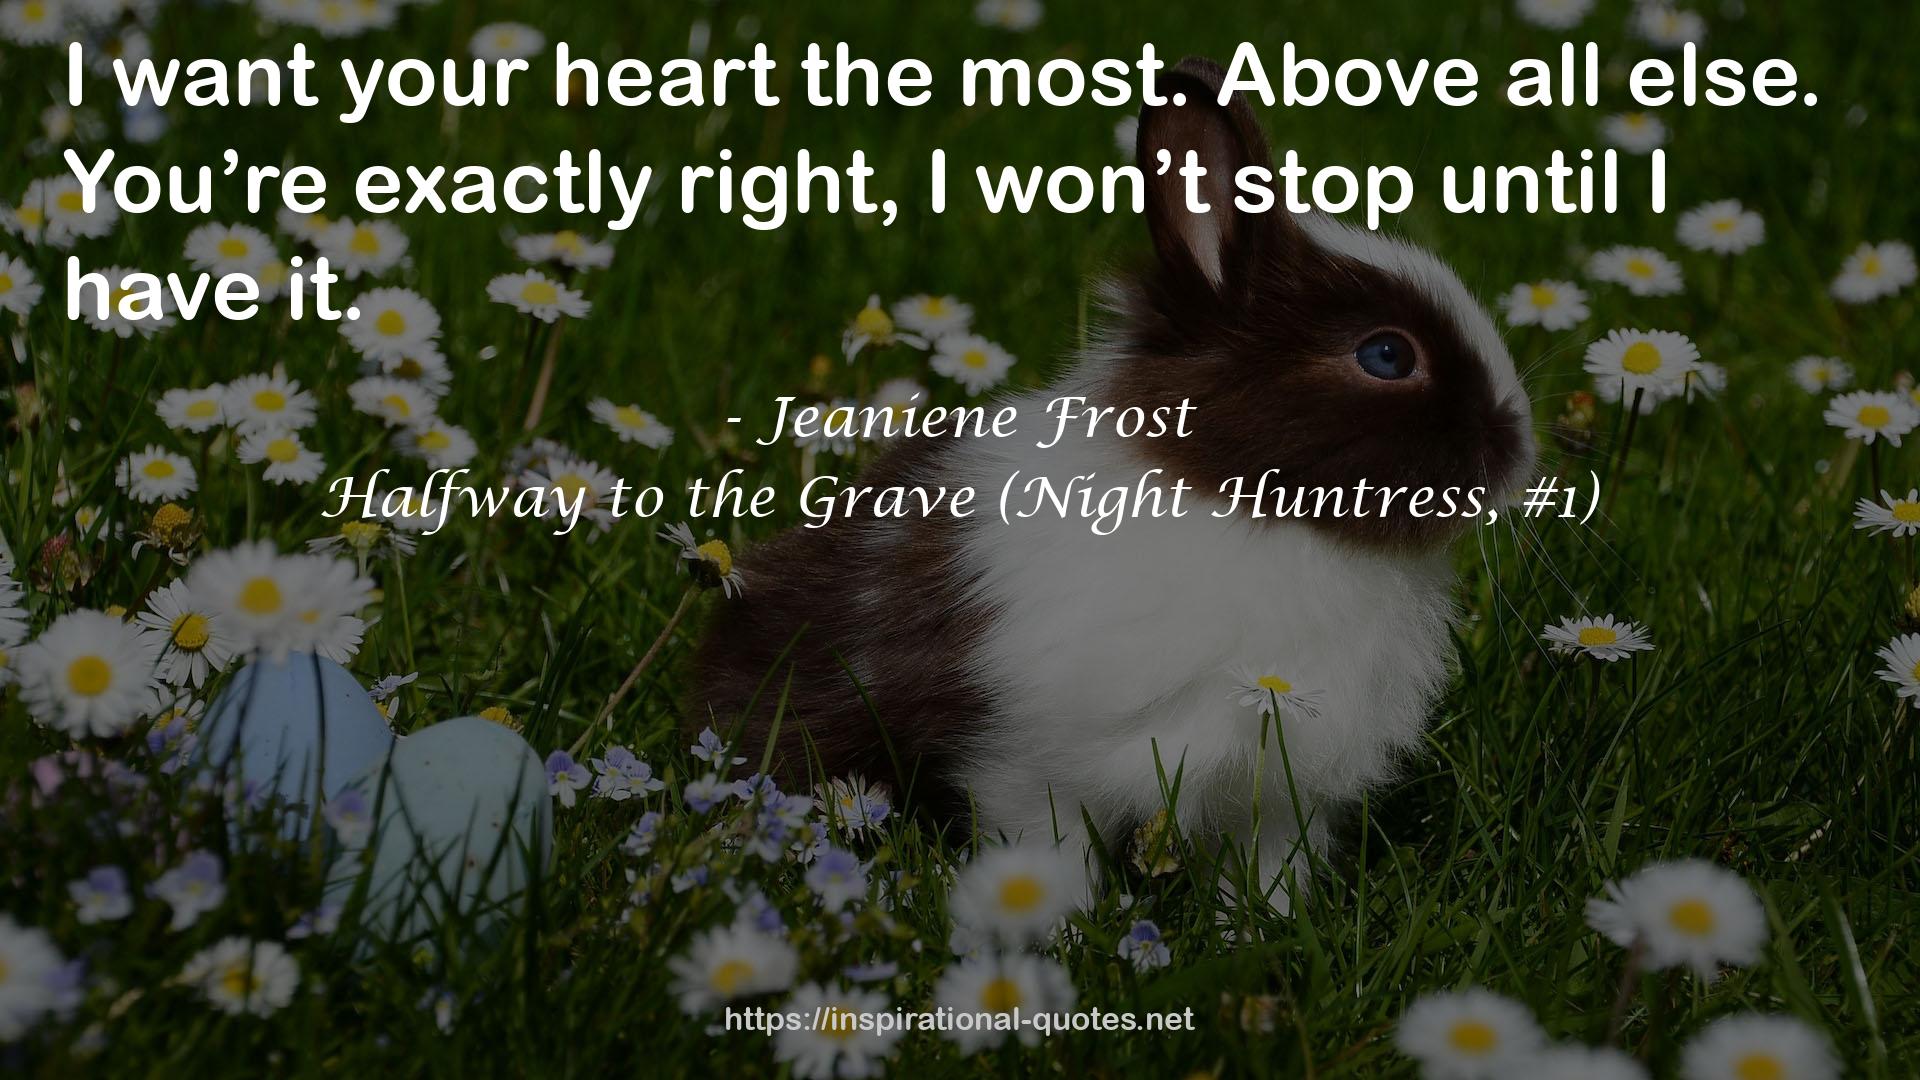 Halfway to the Grave (Night Huntress, #1) QUOTES